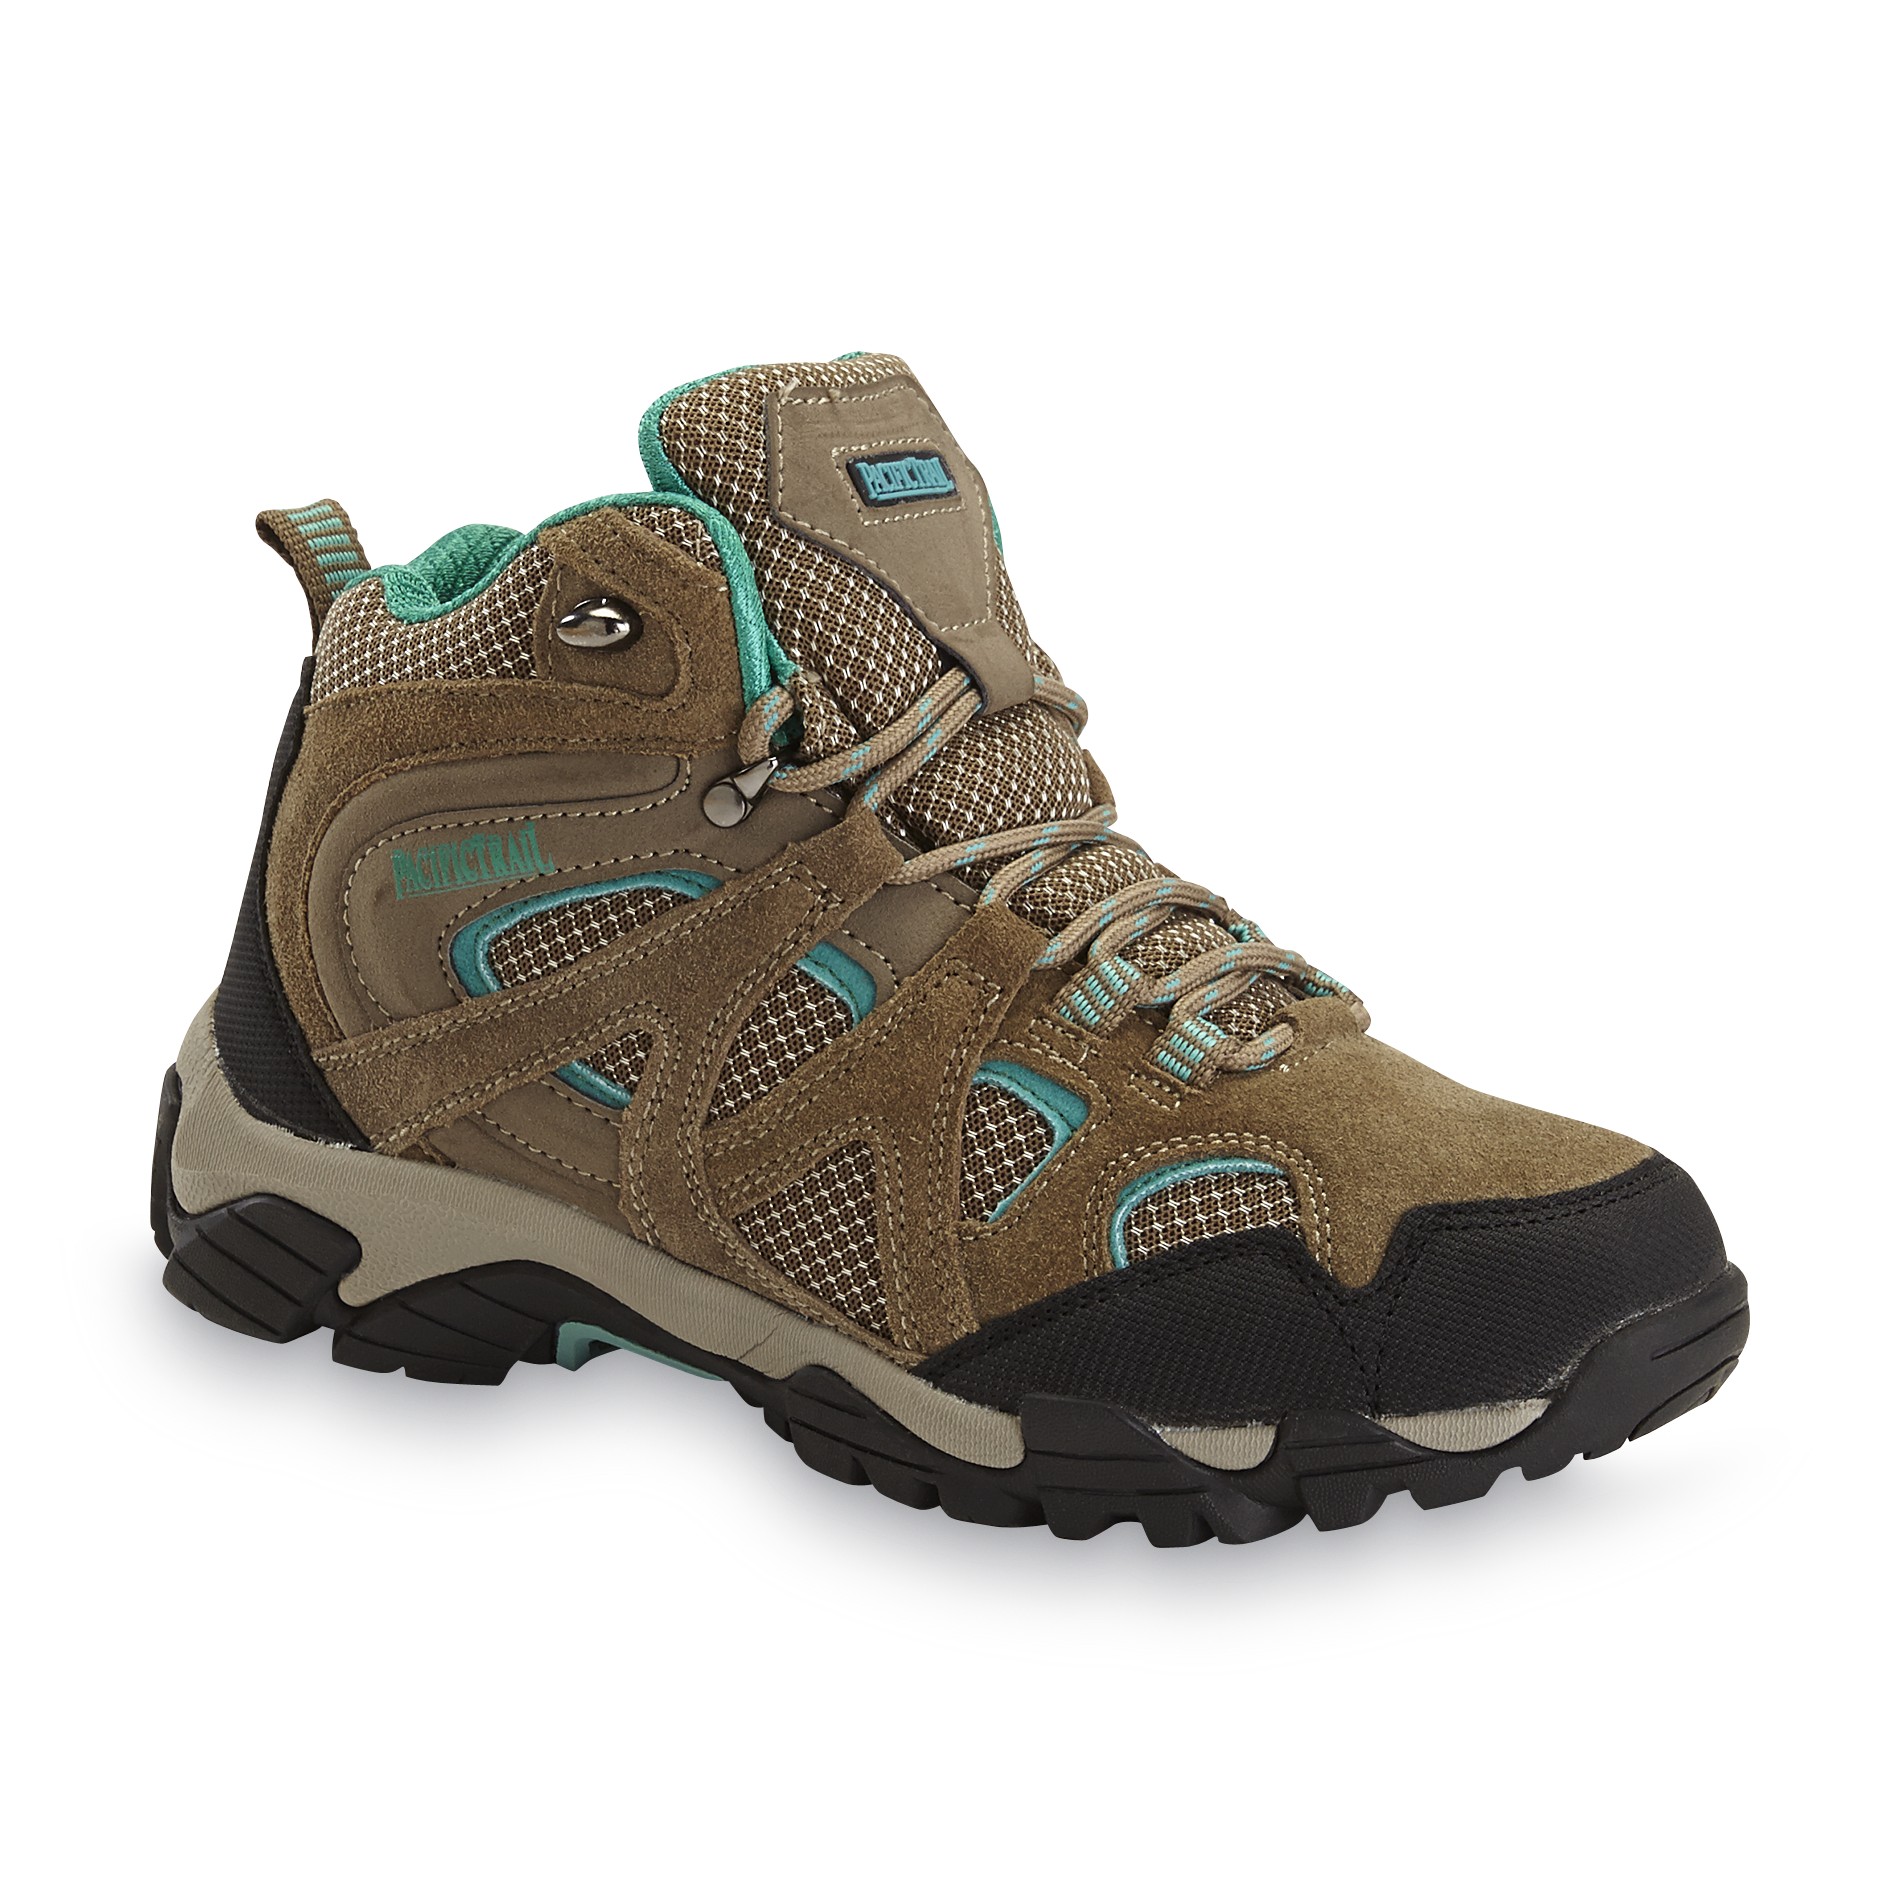 Pacific Trail Women's Diller Brown/Teal Lightweight Hiking Shoe